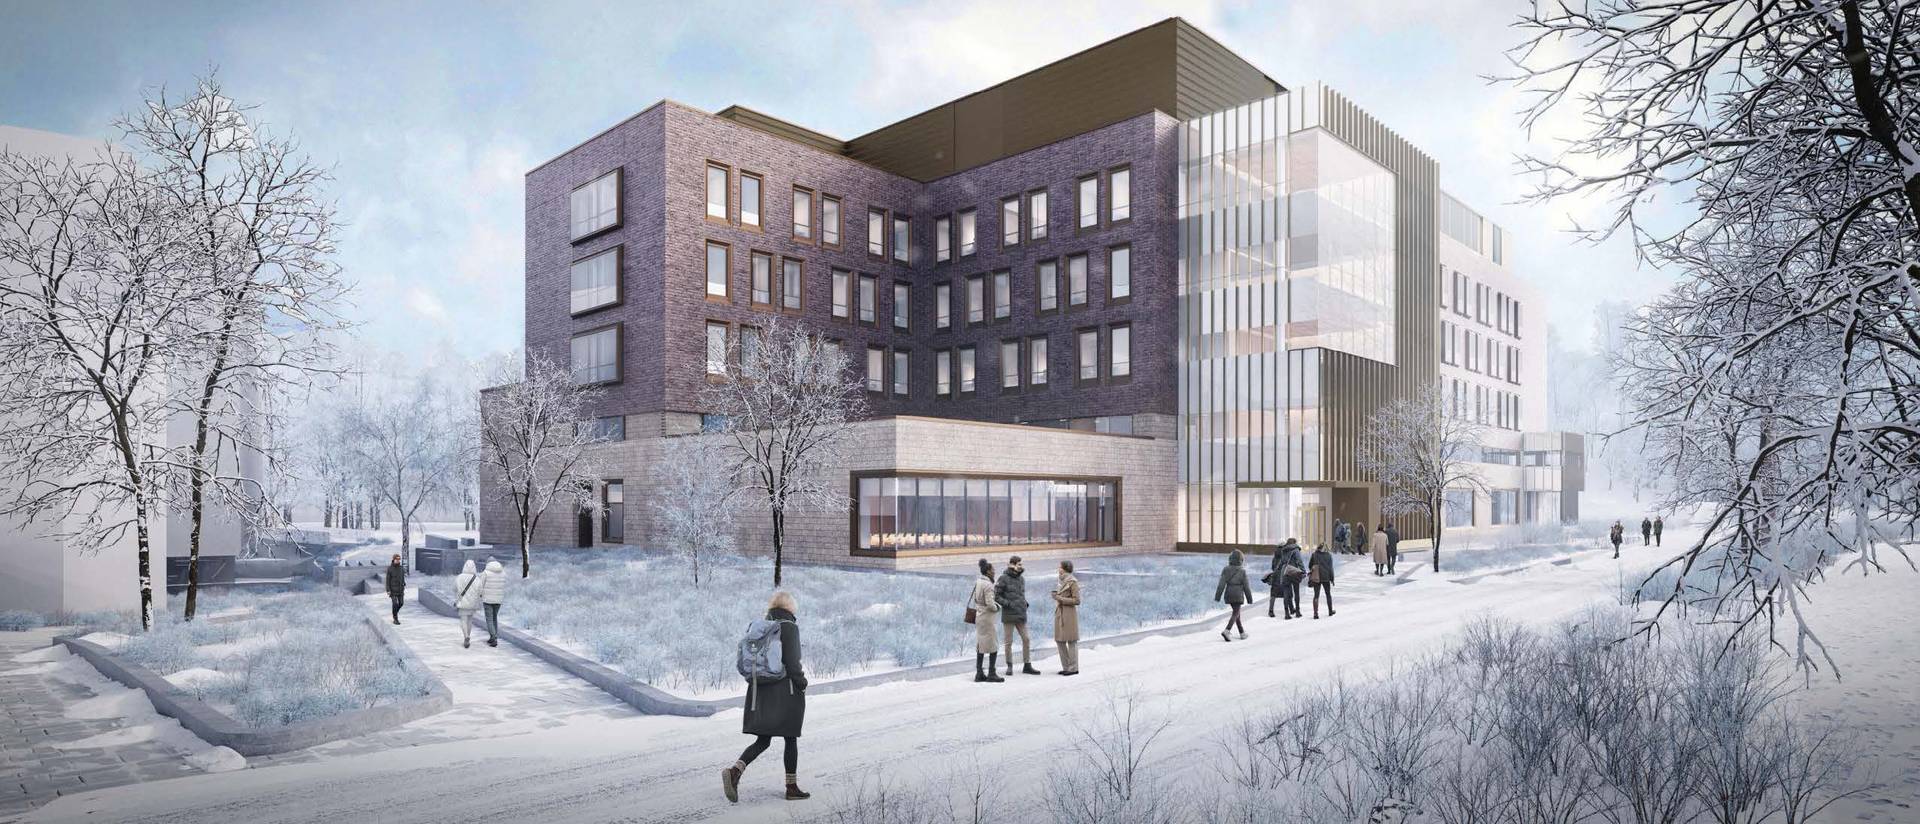 Science and Health Sciences building rendering